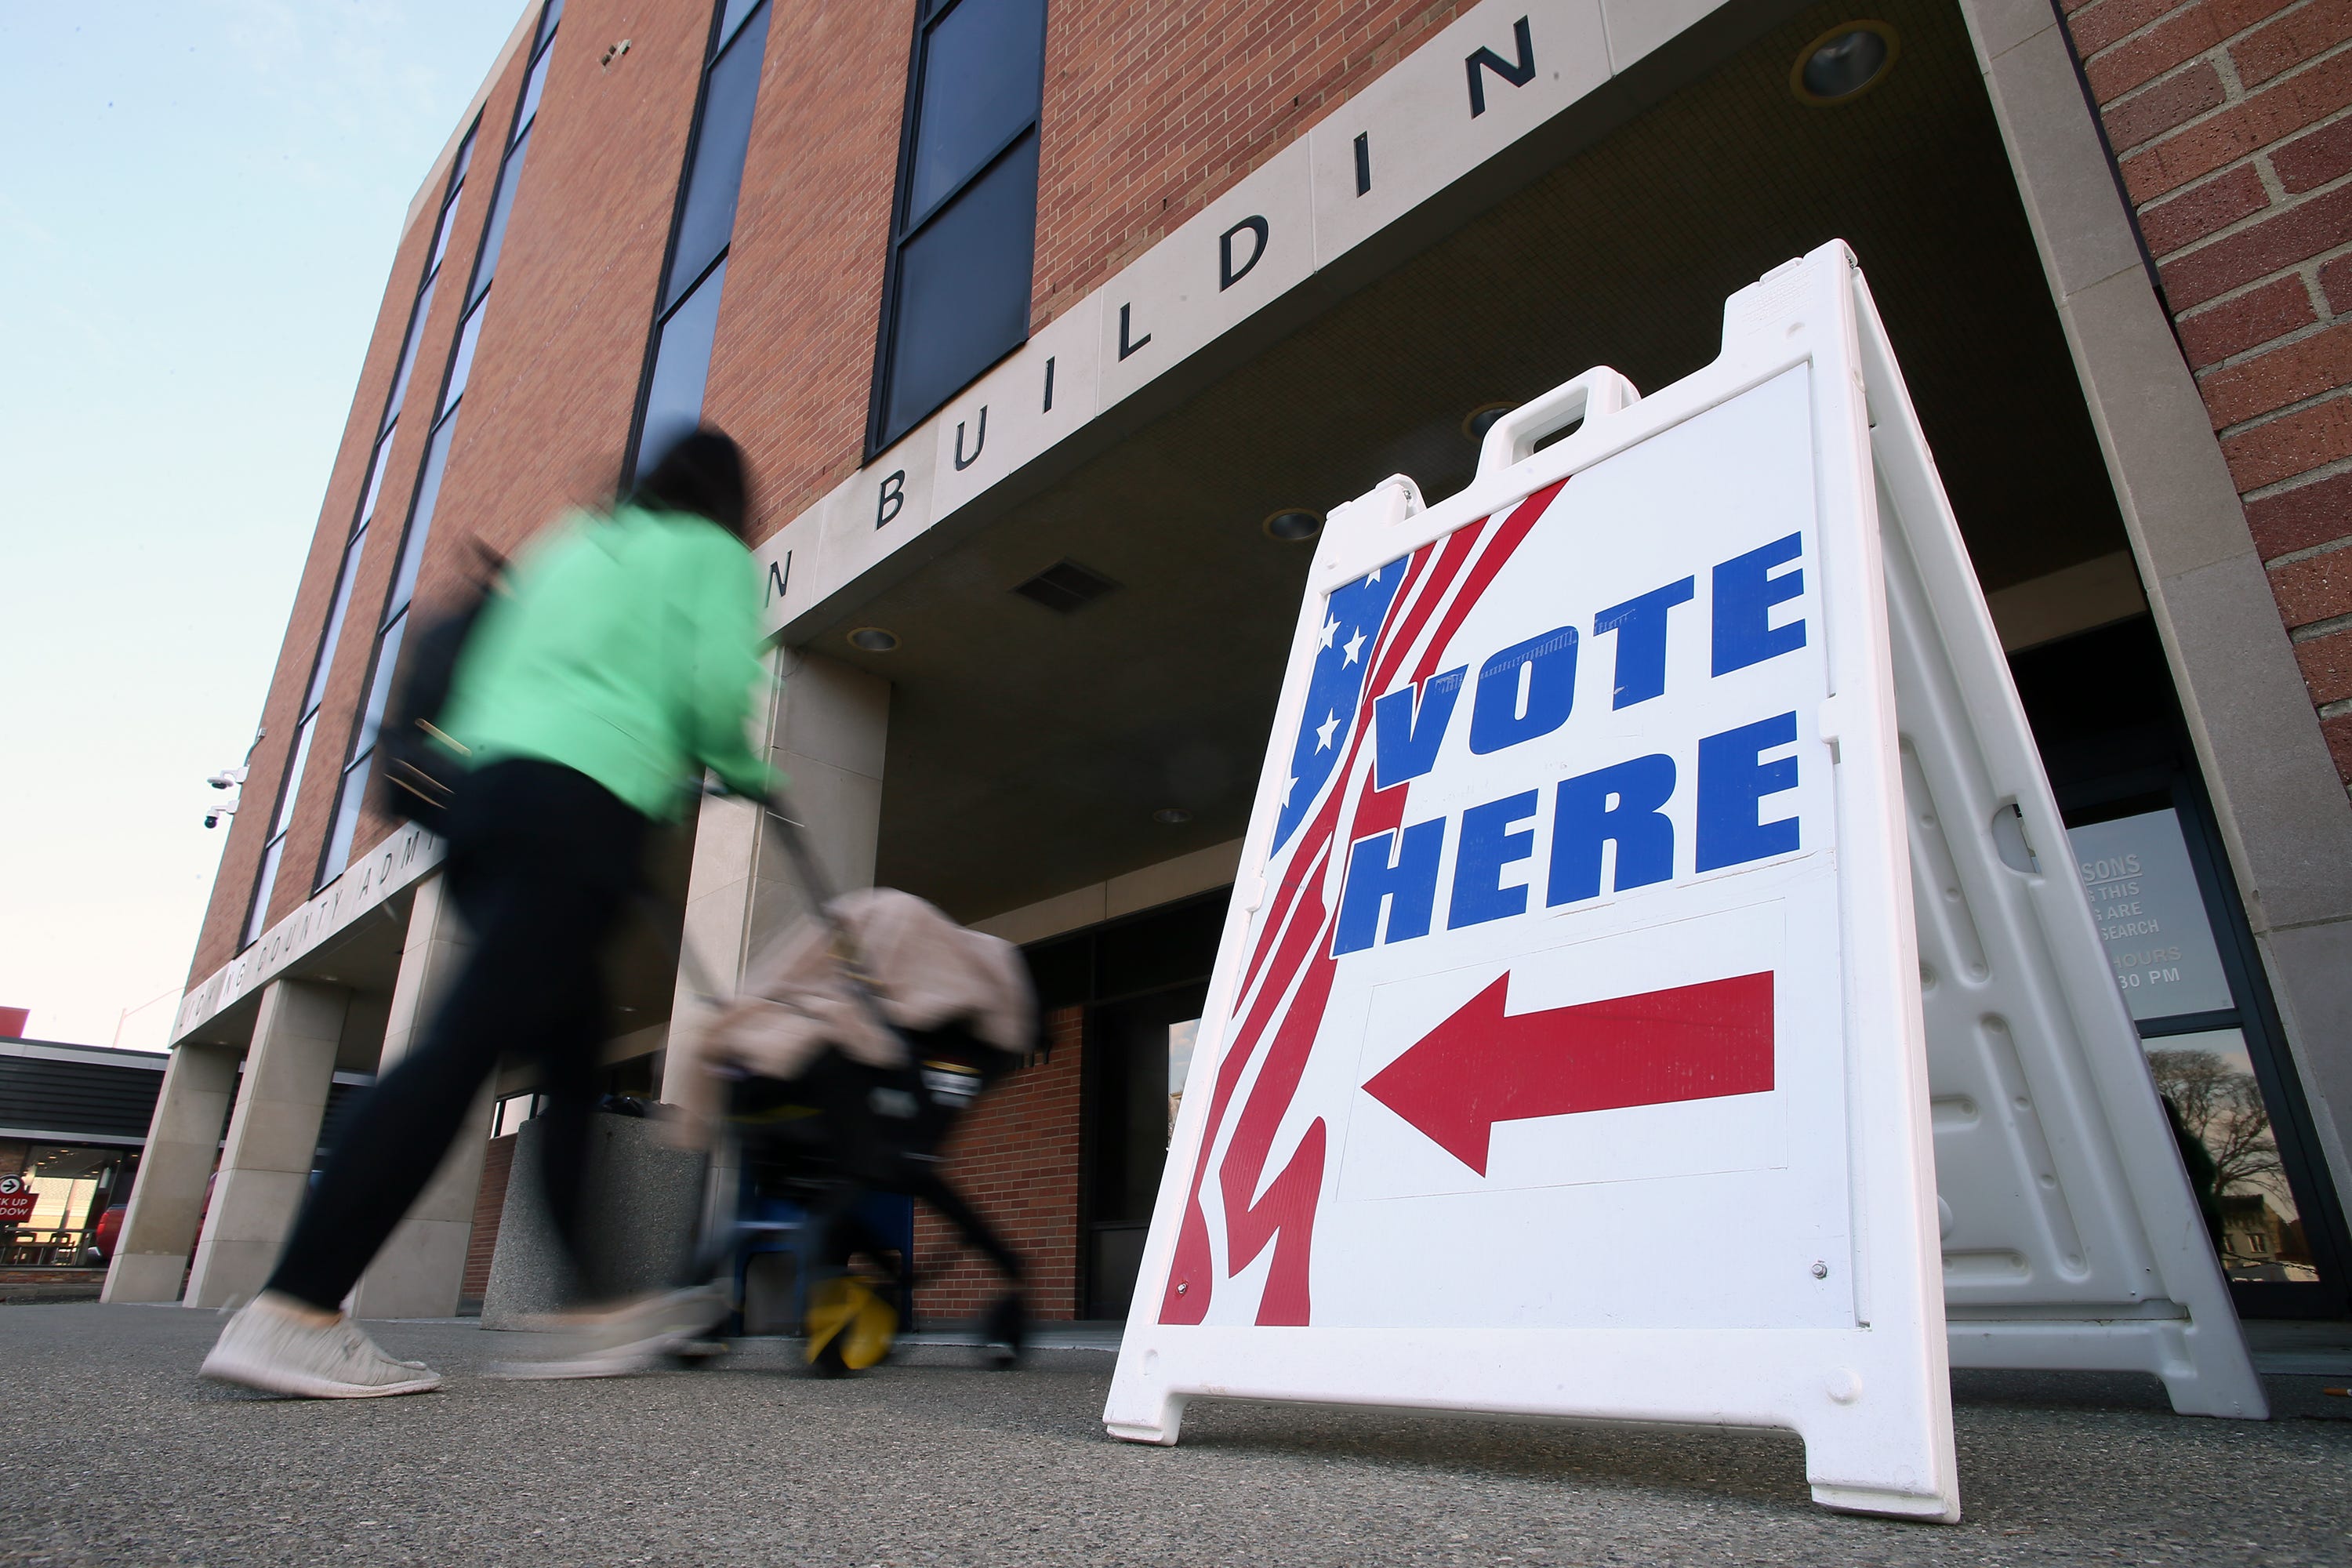 what's on the primary ballot in licking county? here is a summary of contested races, issues